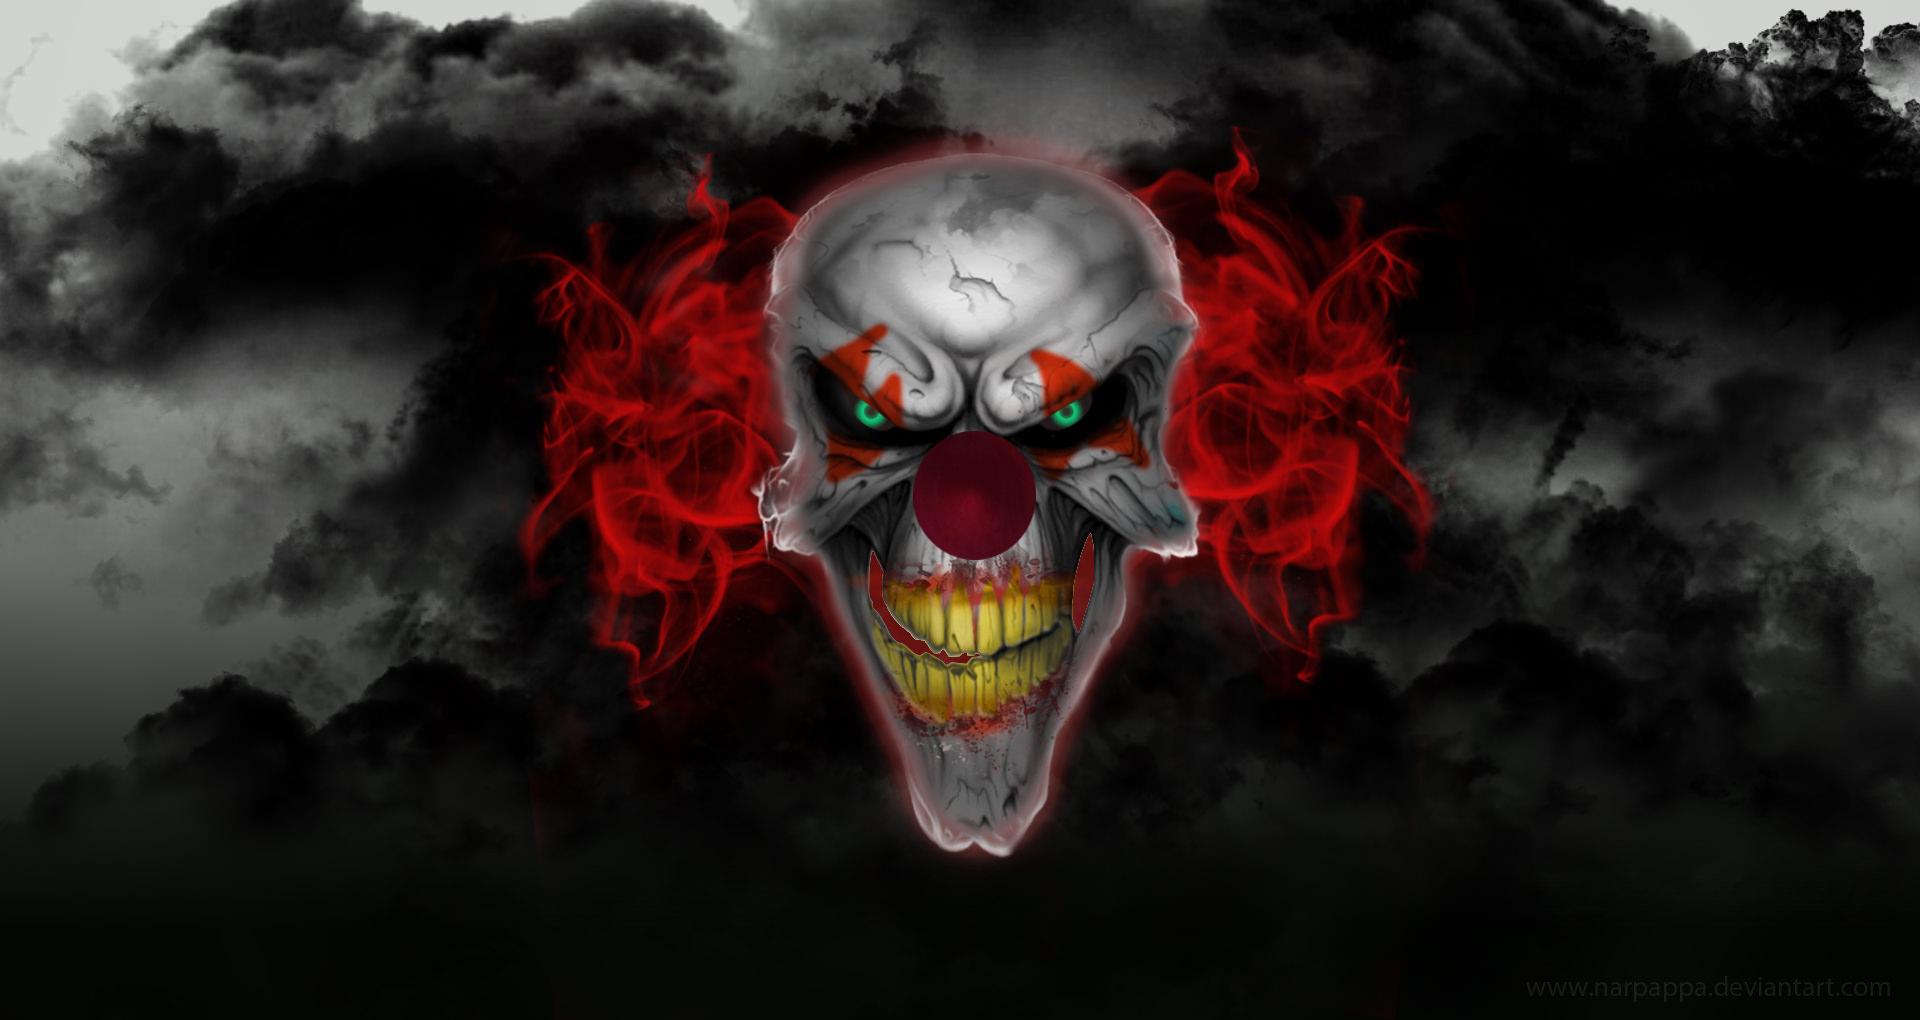 Scary Clown with Red Hair wallpaper from Clowns wallpaper